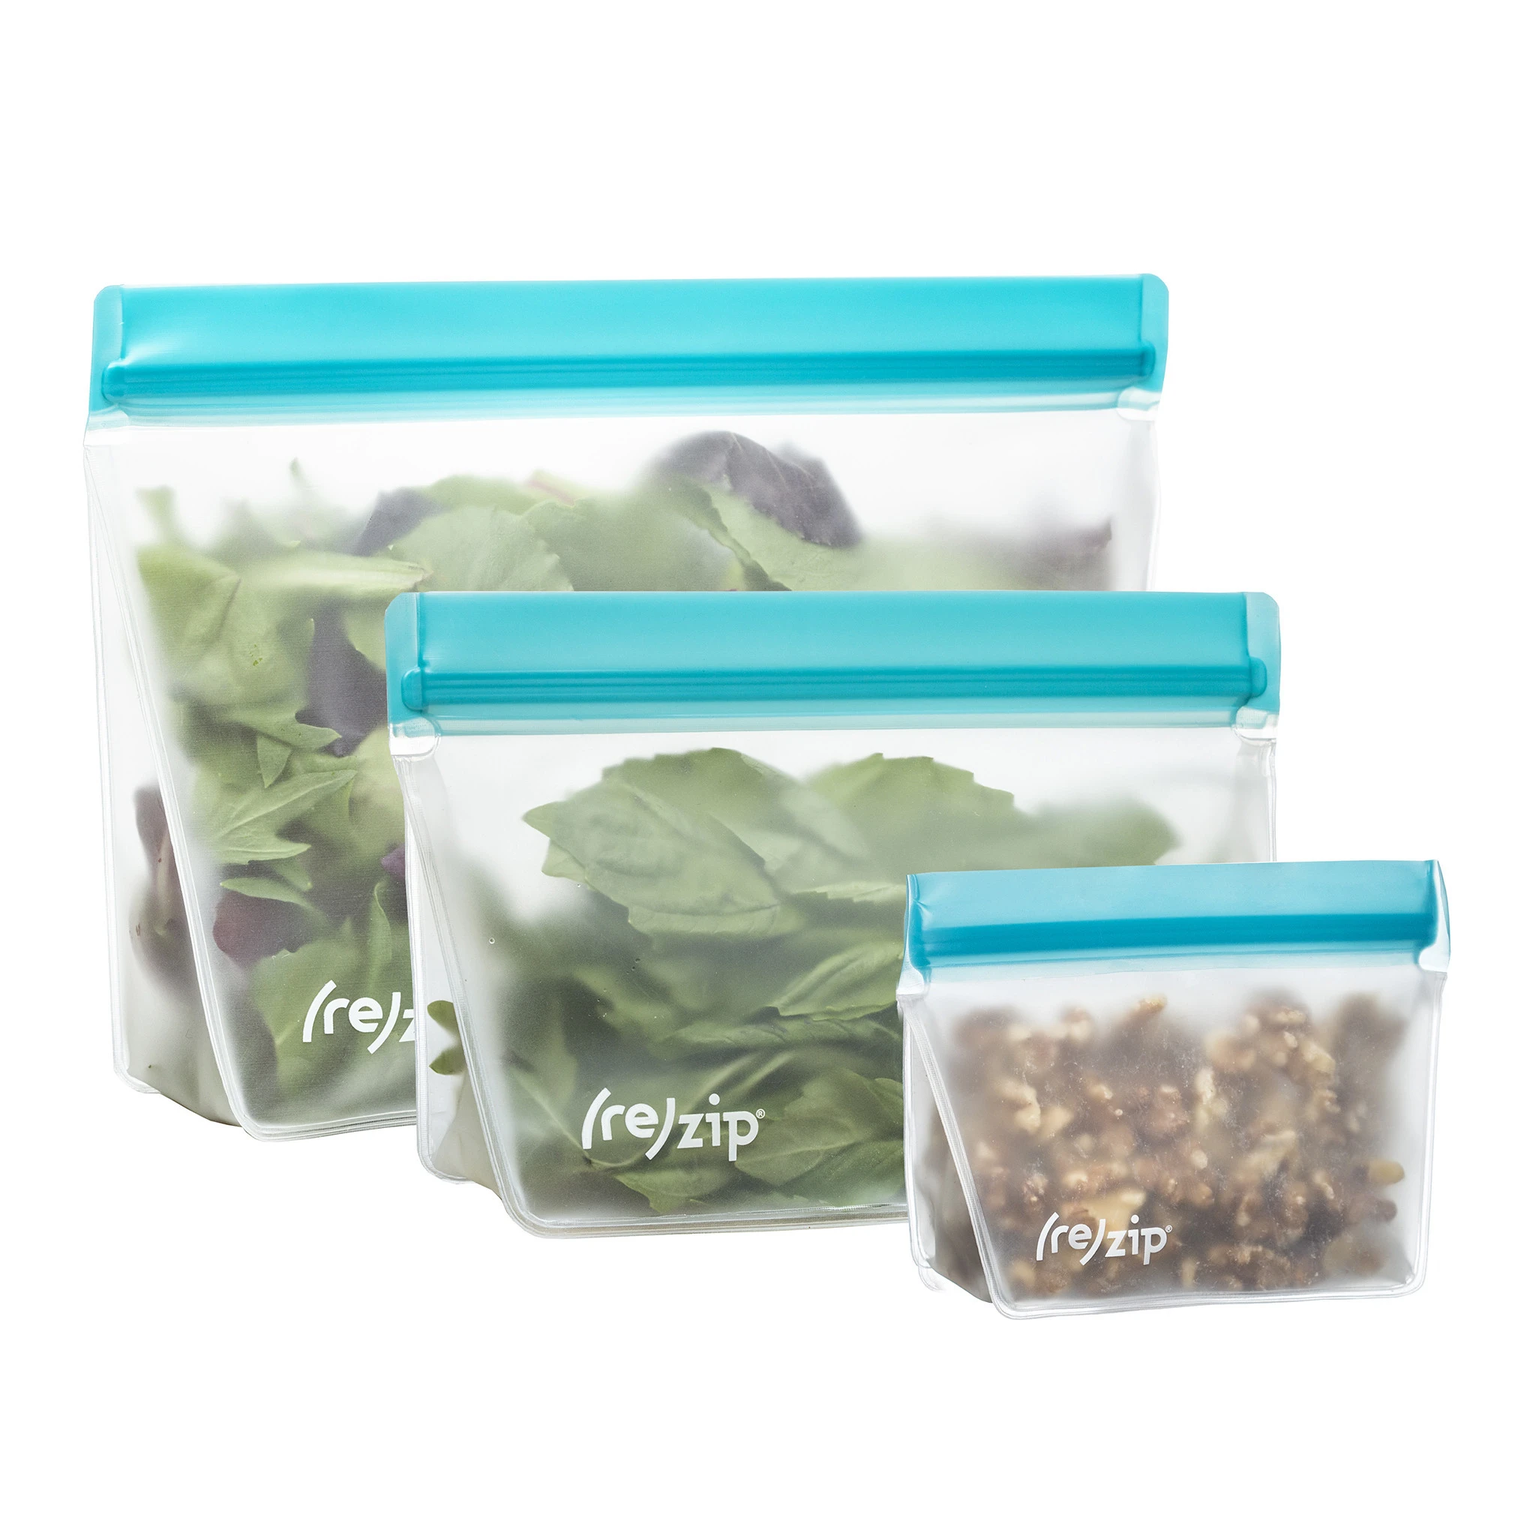 3-piece leakproof reusable stand-up food storage bags 1 cup, 2 cup and 4 cup in Aqua